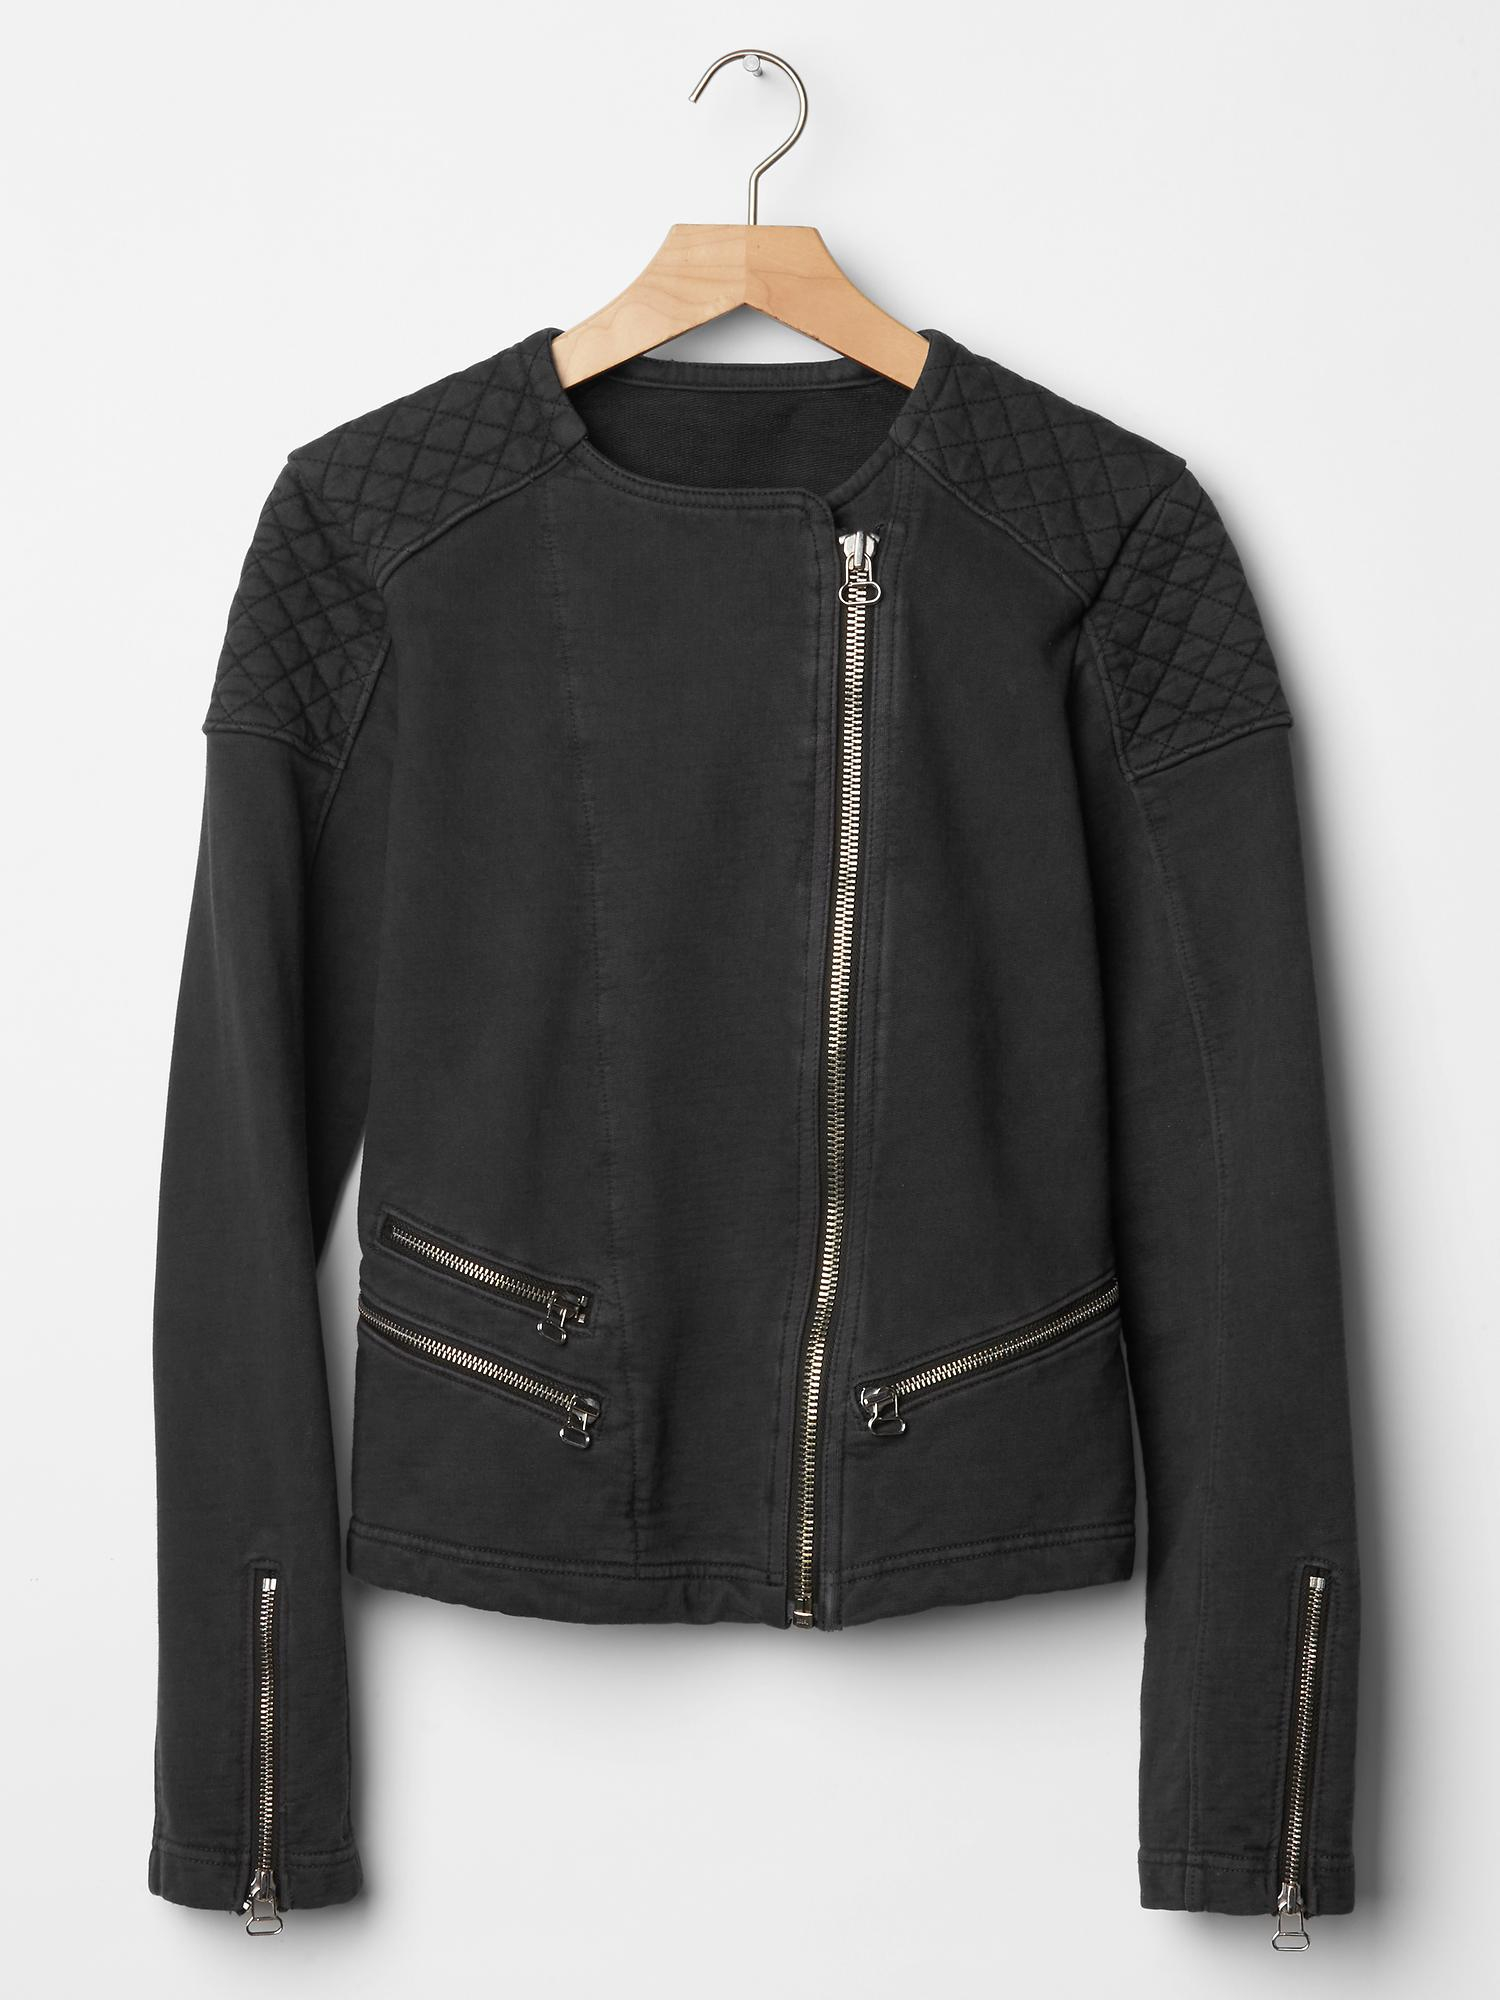 Gap Quilted Moto Knit Jacket in Black (soft black) Lyst